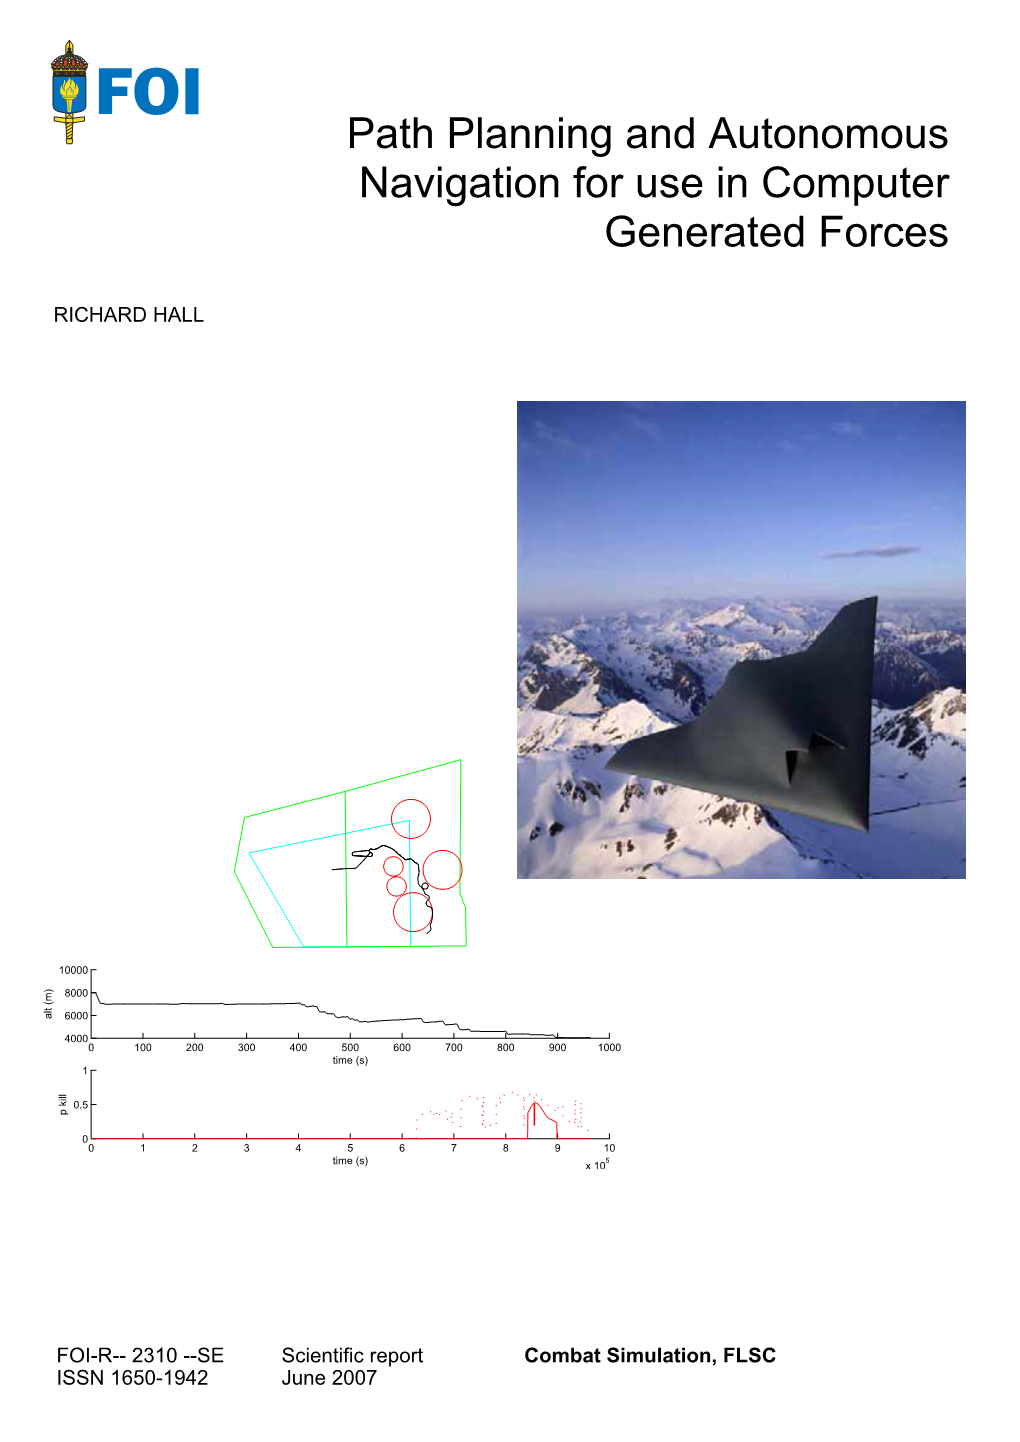 Path Planning and Autonomous Navigation for Use in Computer Generated Forces